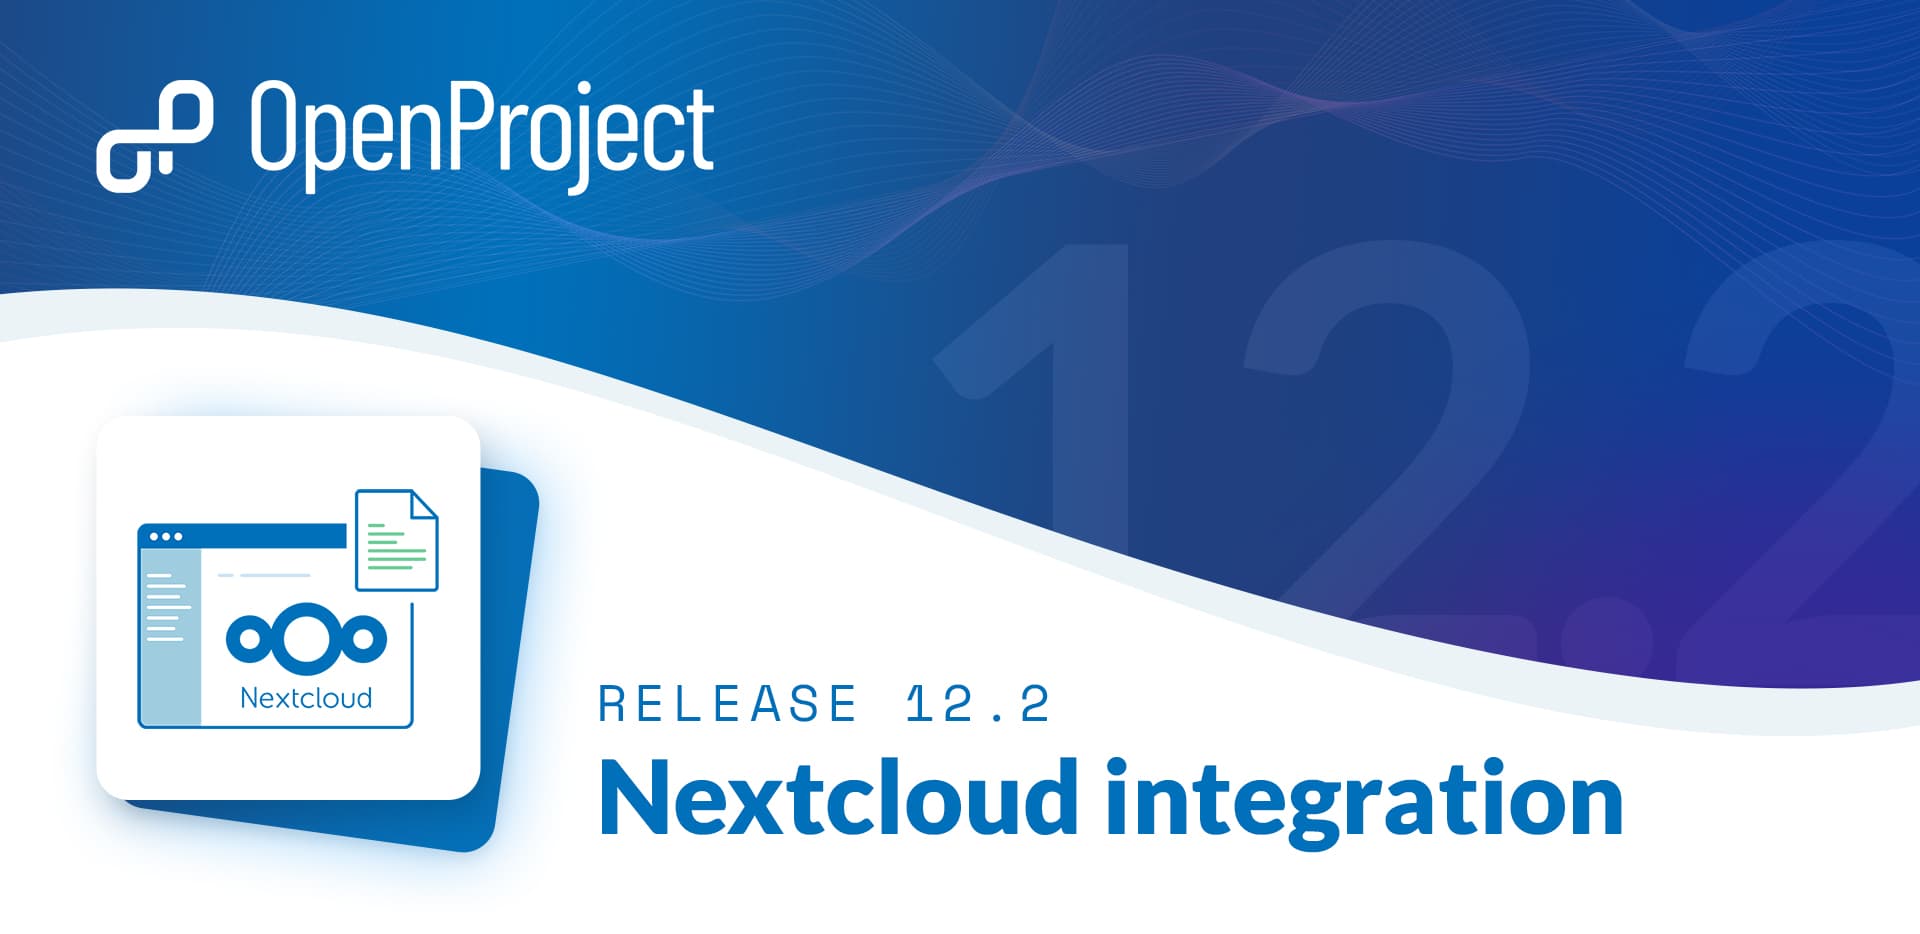 OpenProject 12.2: file management with Nextcloud, improved scheduling and log time for other users